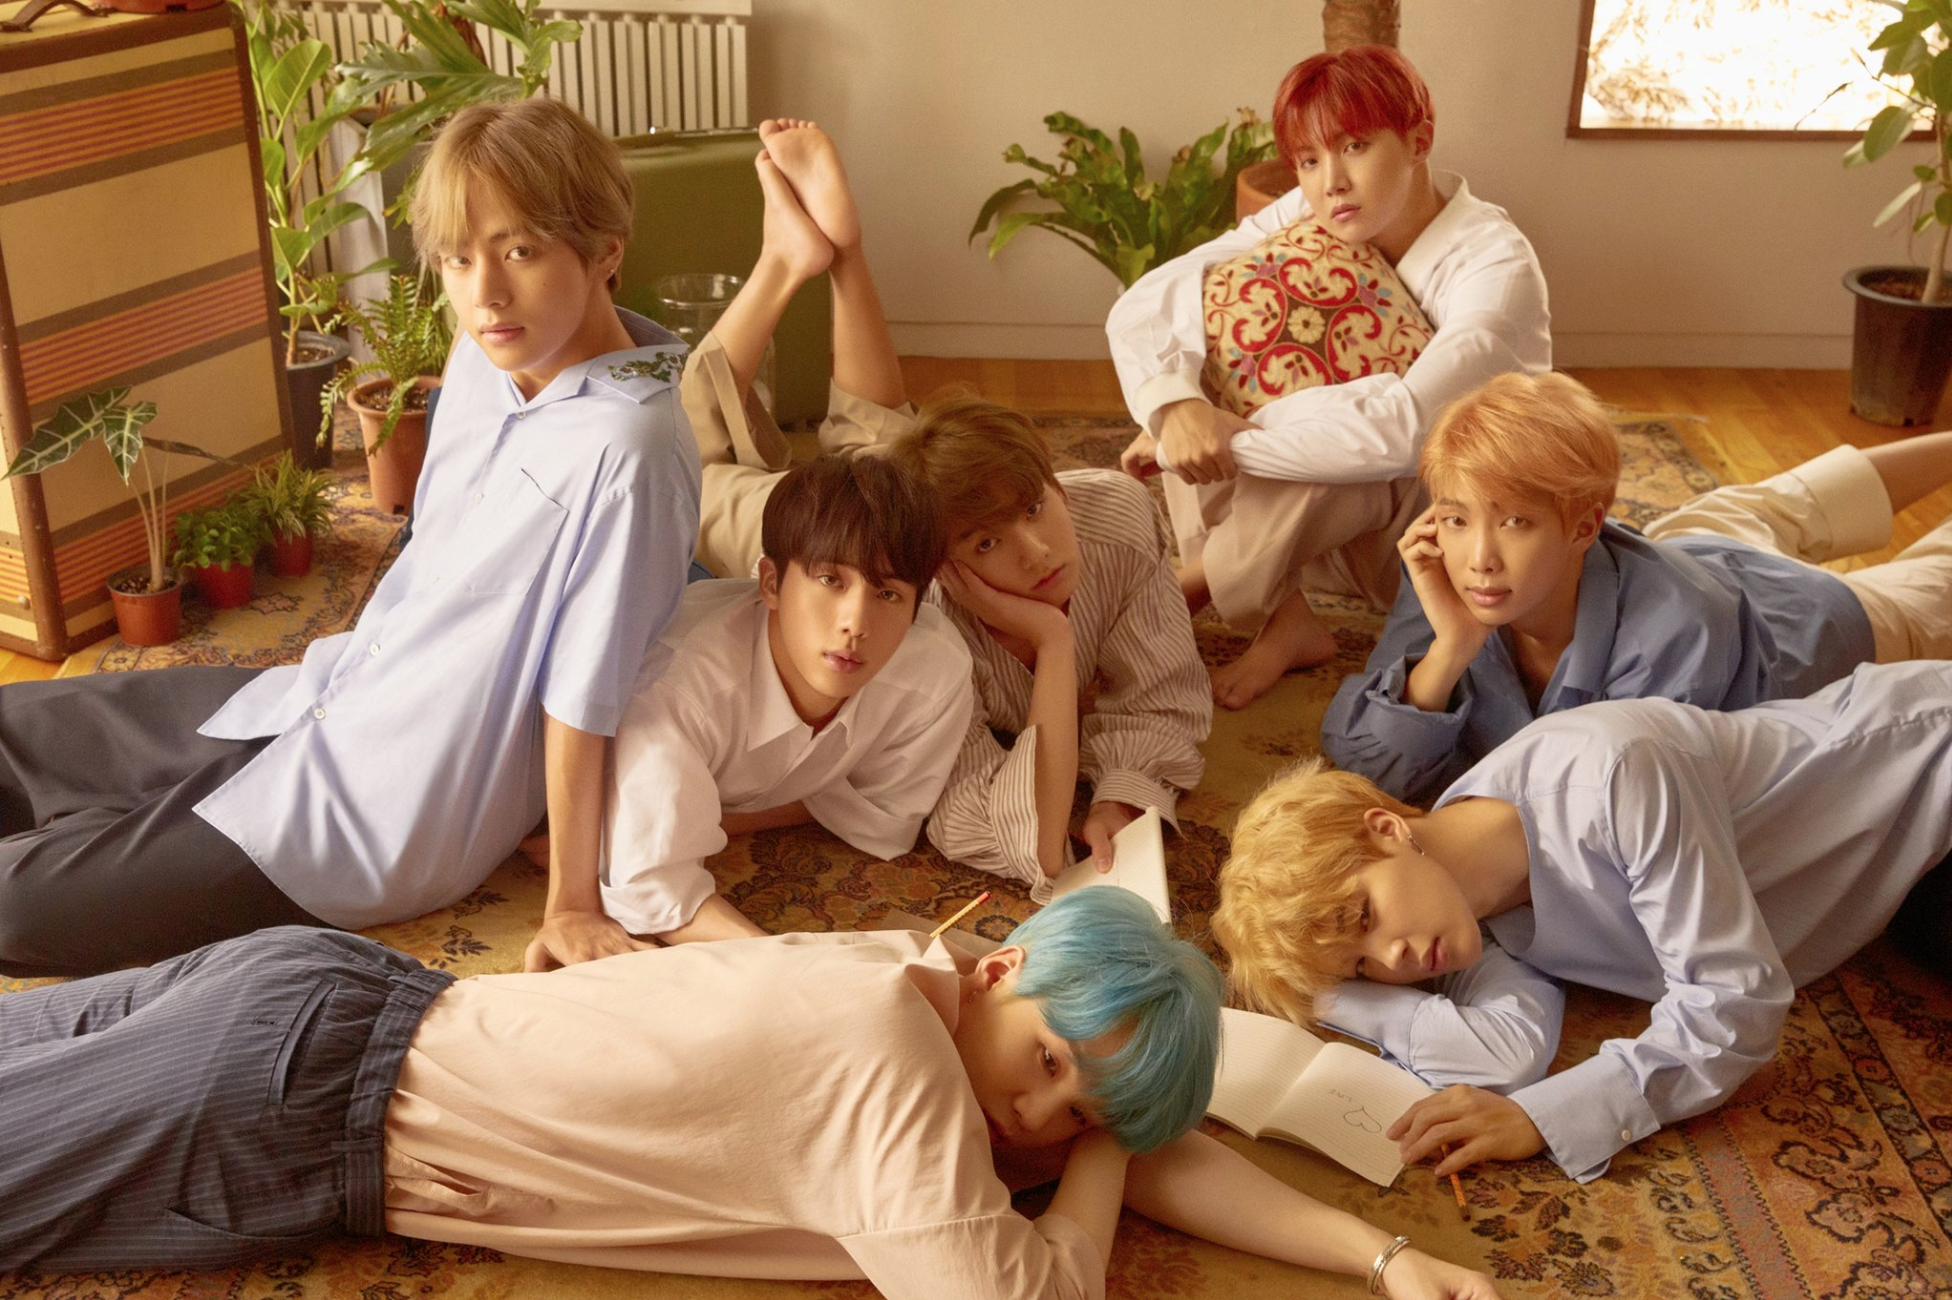 See BTS' New Album Concept + Photo and Our Reaction!